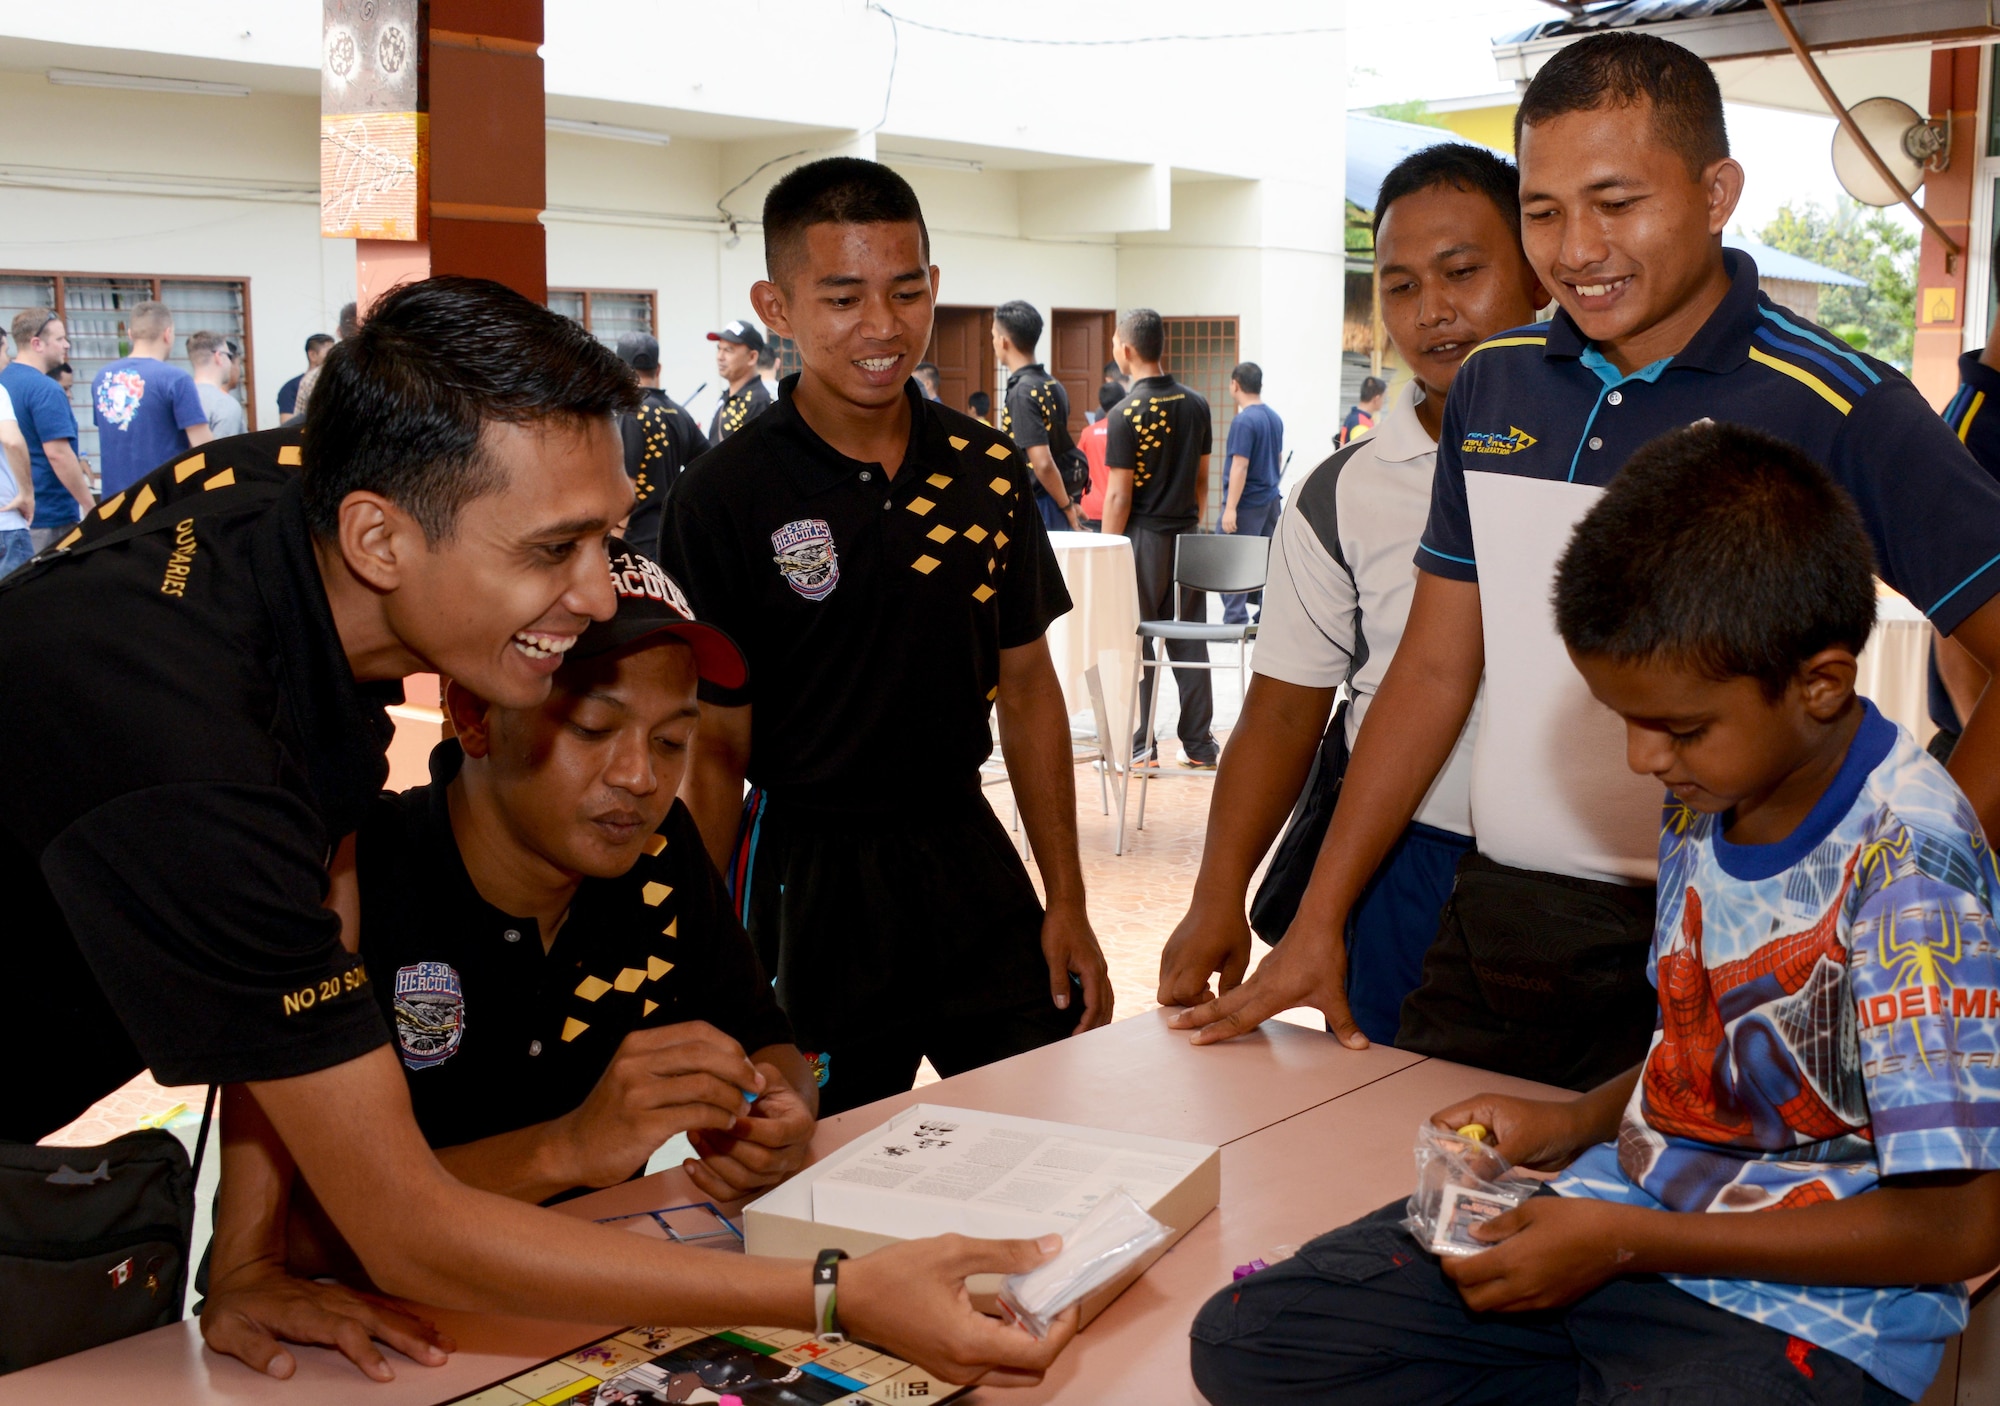 Members from the Royal Malaysian Air Force play a game with a child from the Rumah Kasih Hormoni Orphanage near Kuala Lumpur, Malayasia, June 6, 2015.  As part of Exercise Teak Mint, members from the RMAF, U.S. Air Force came together to help with repairs around the orphanage.  Members from the 353rd Special Operations Group donated more than  $1,000 in clothes, games and sports equipment.   (U.S. Air Force Tech. Sgt. Kristine Dreyer)